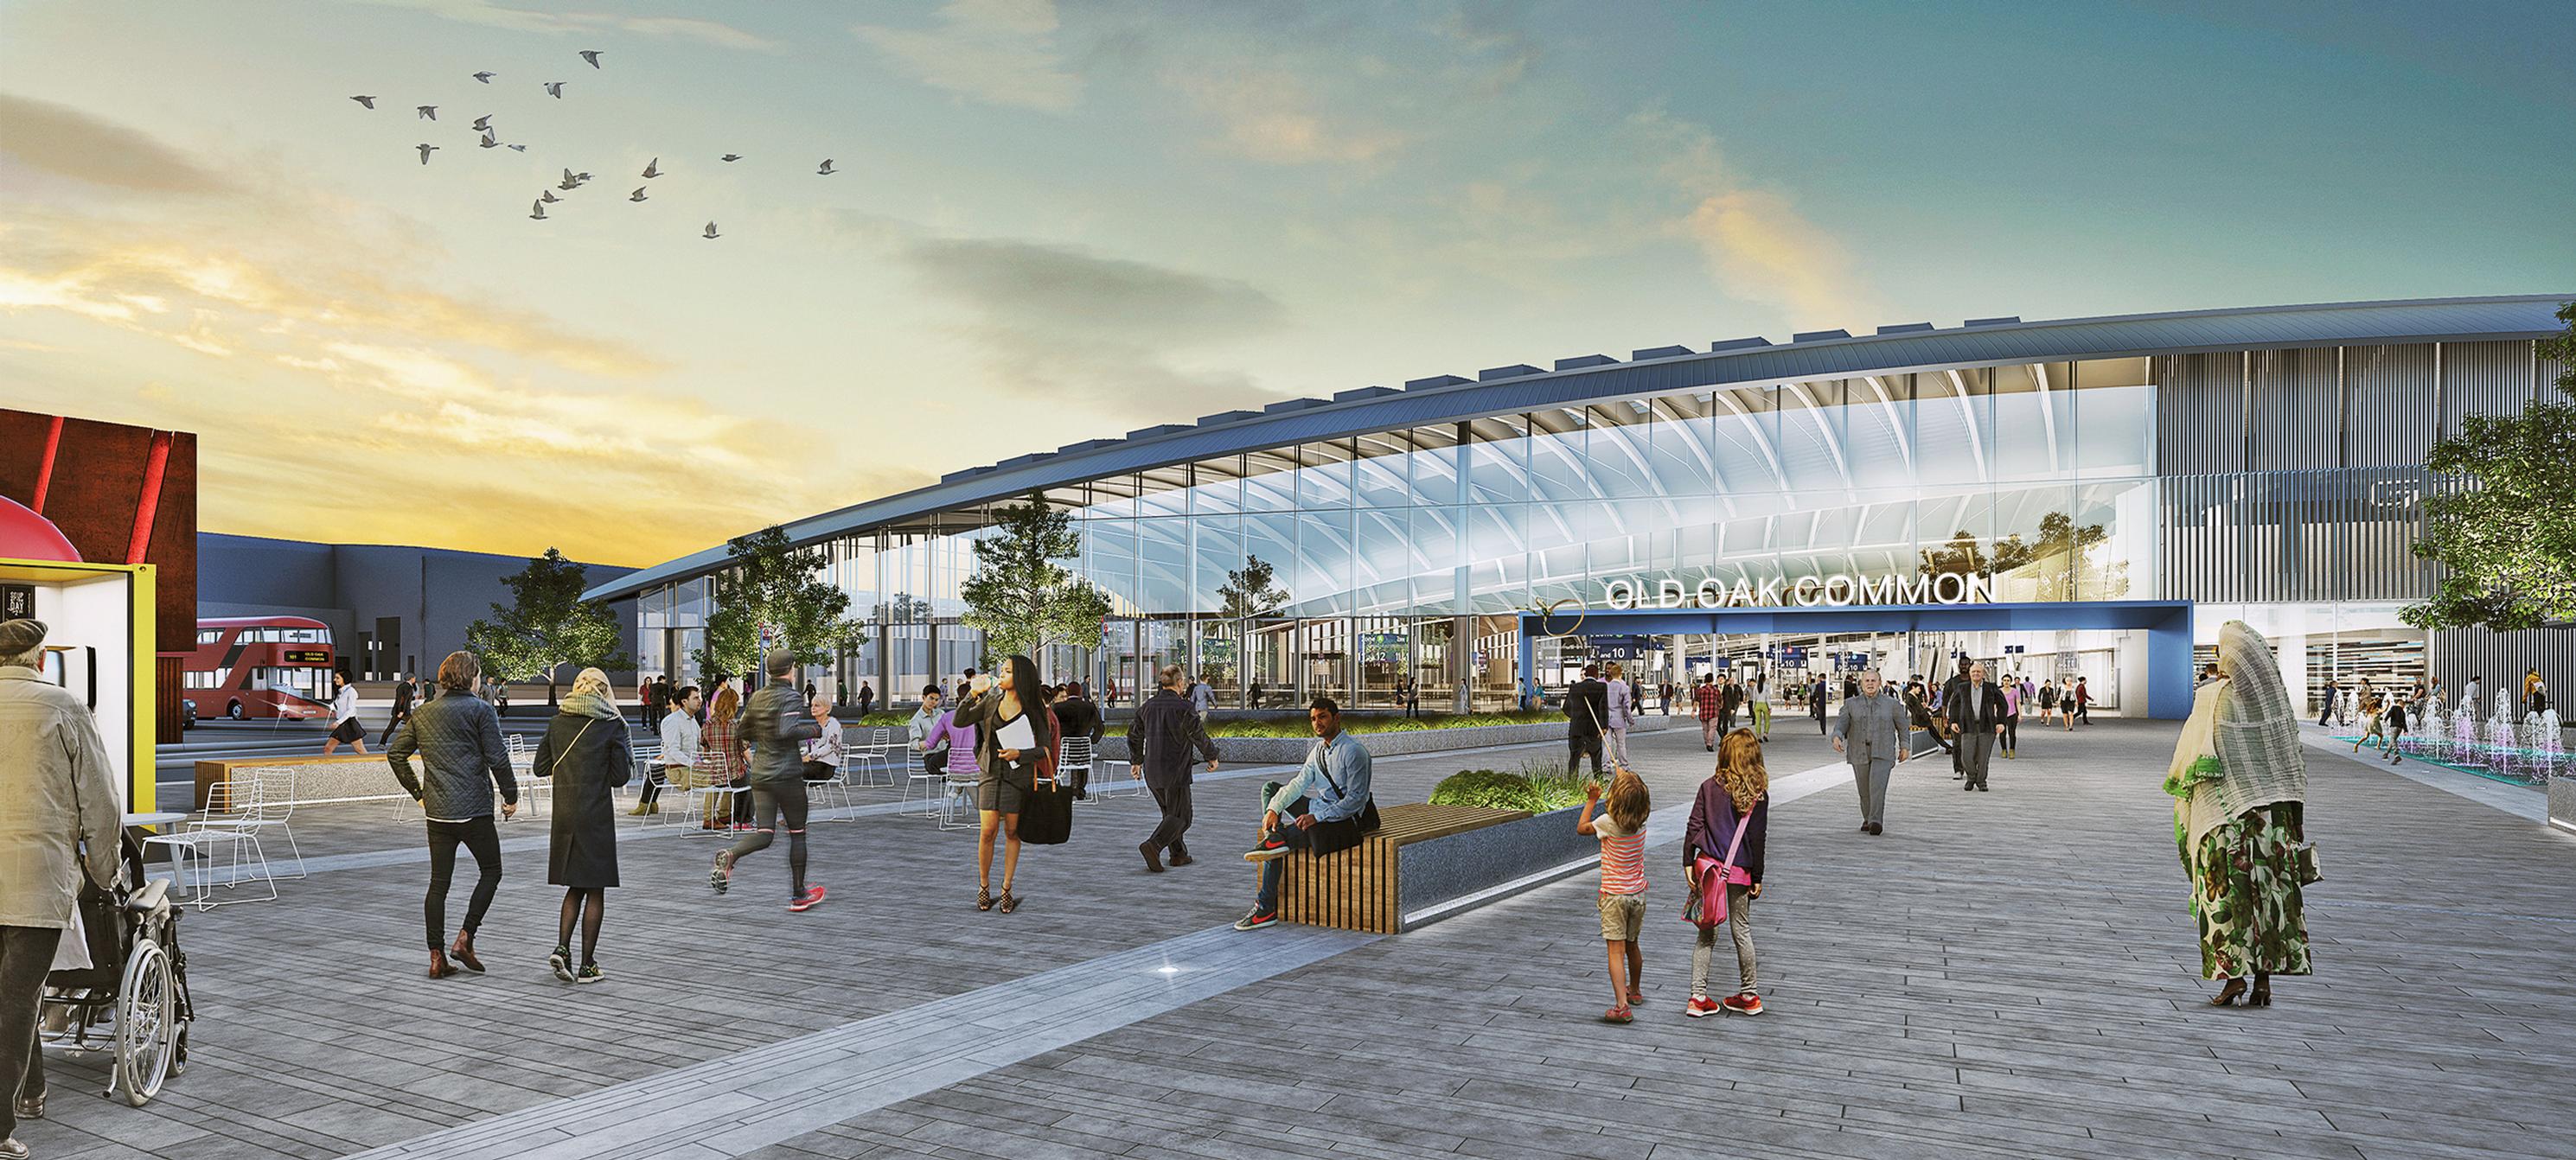 Greengauge suggests cutting back HS2 facilities at Old Oak Common station in west London